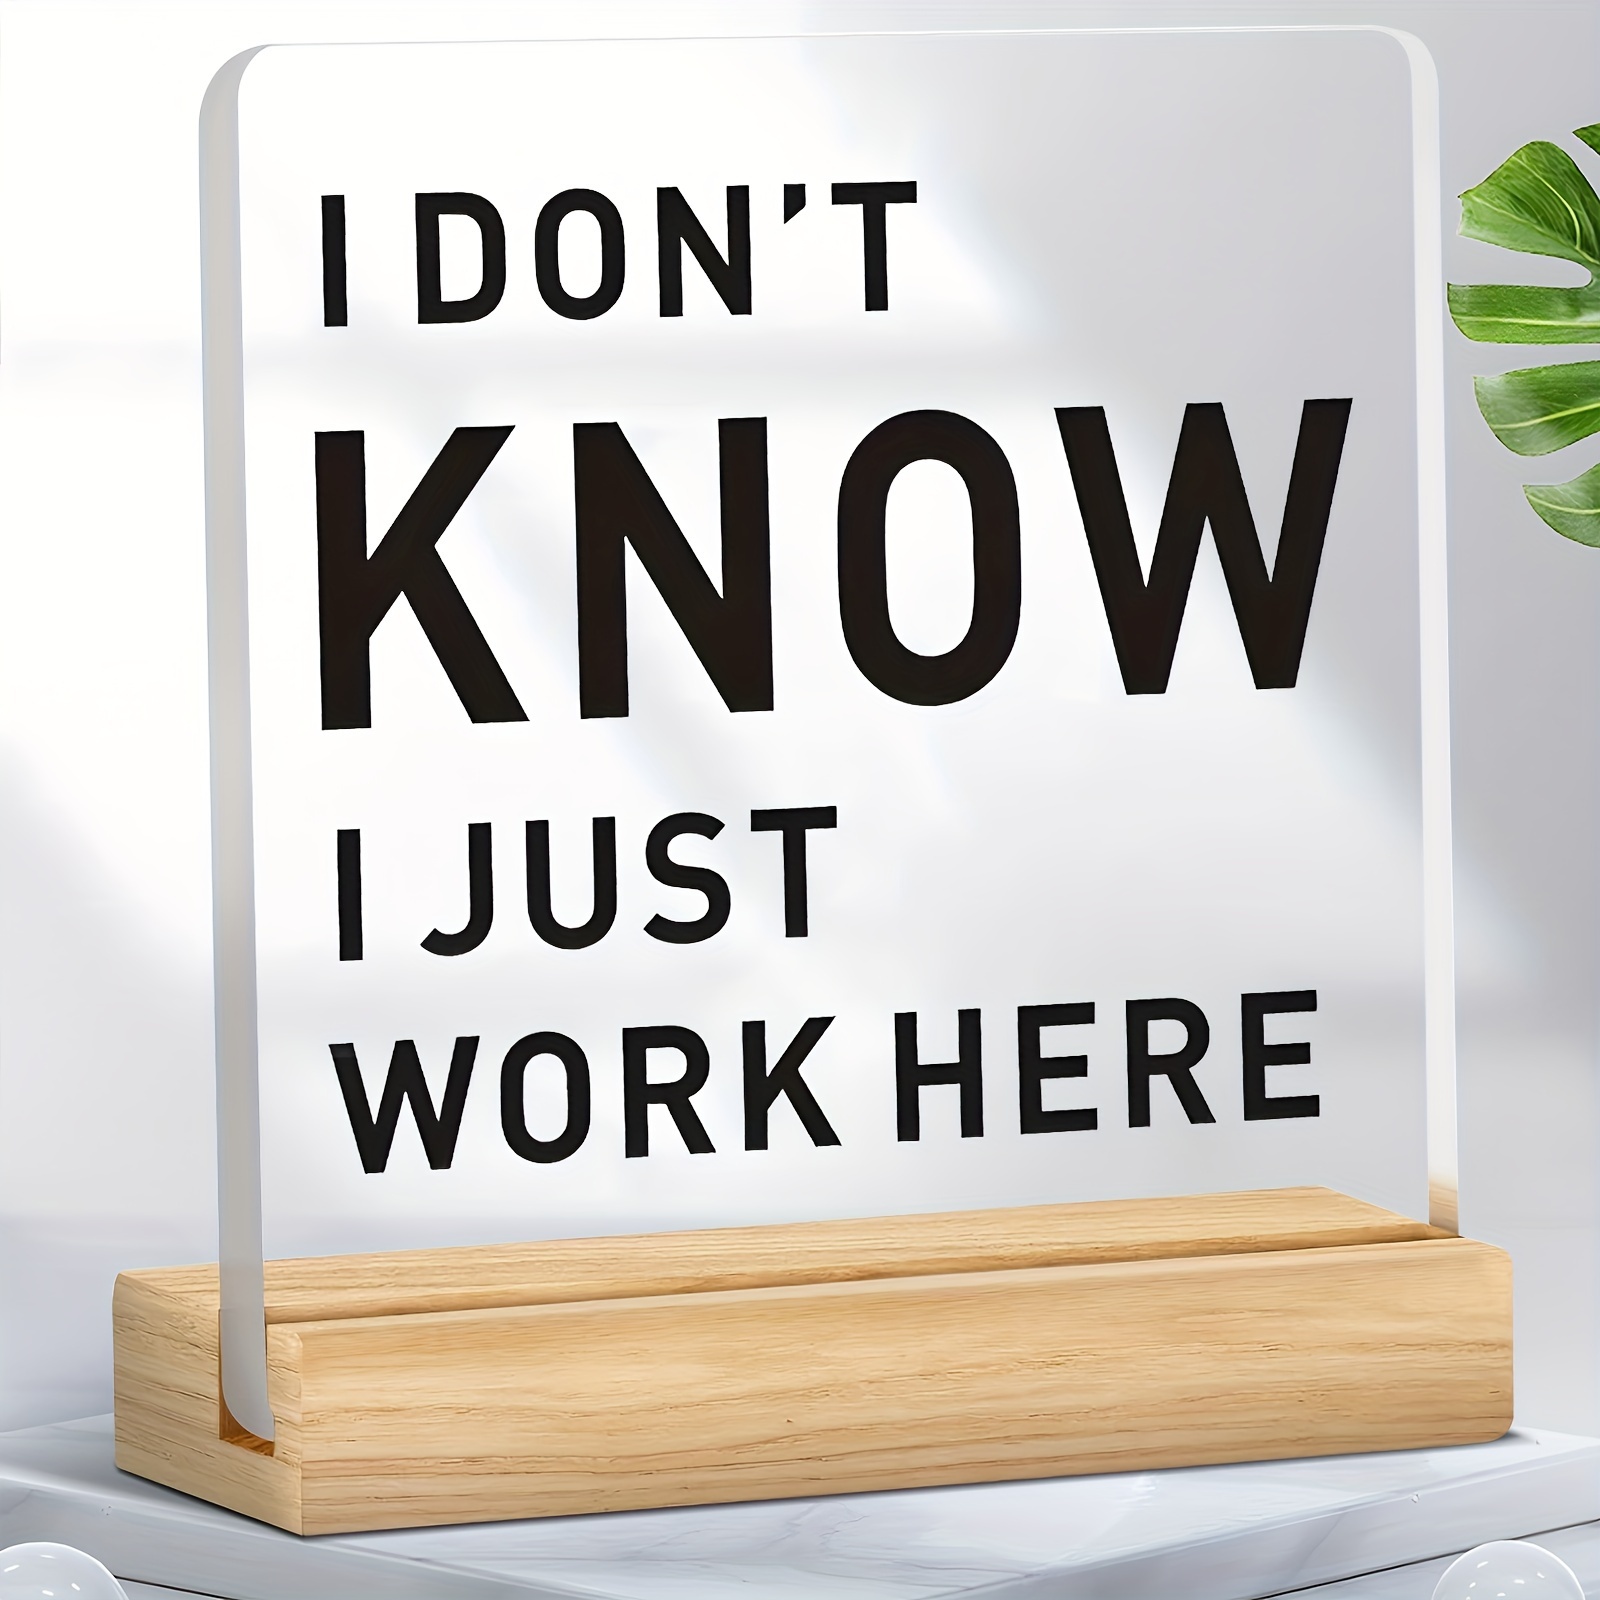 

Humorous 'i Don't Know, I Just Work Here' Acrylic Desk Sign - Perfect For Home Office Decor & Holiday Gifts (thanksgiving, Halloween, Christmas)